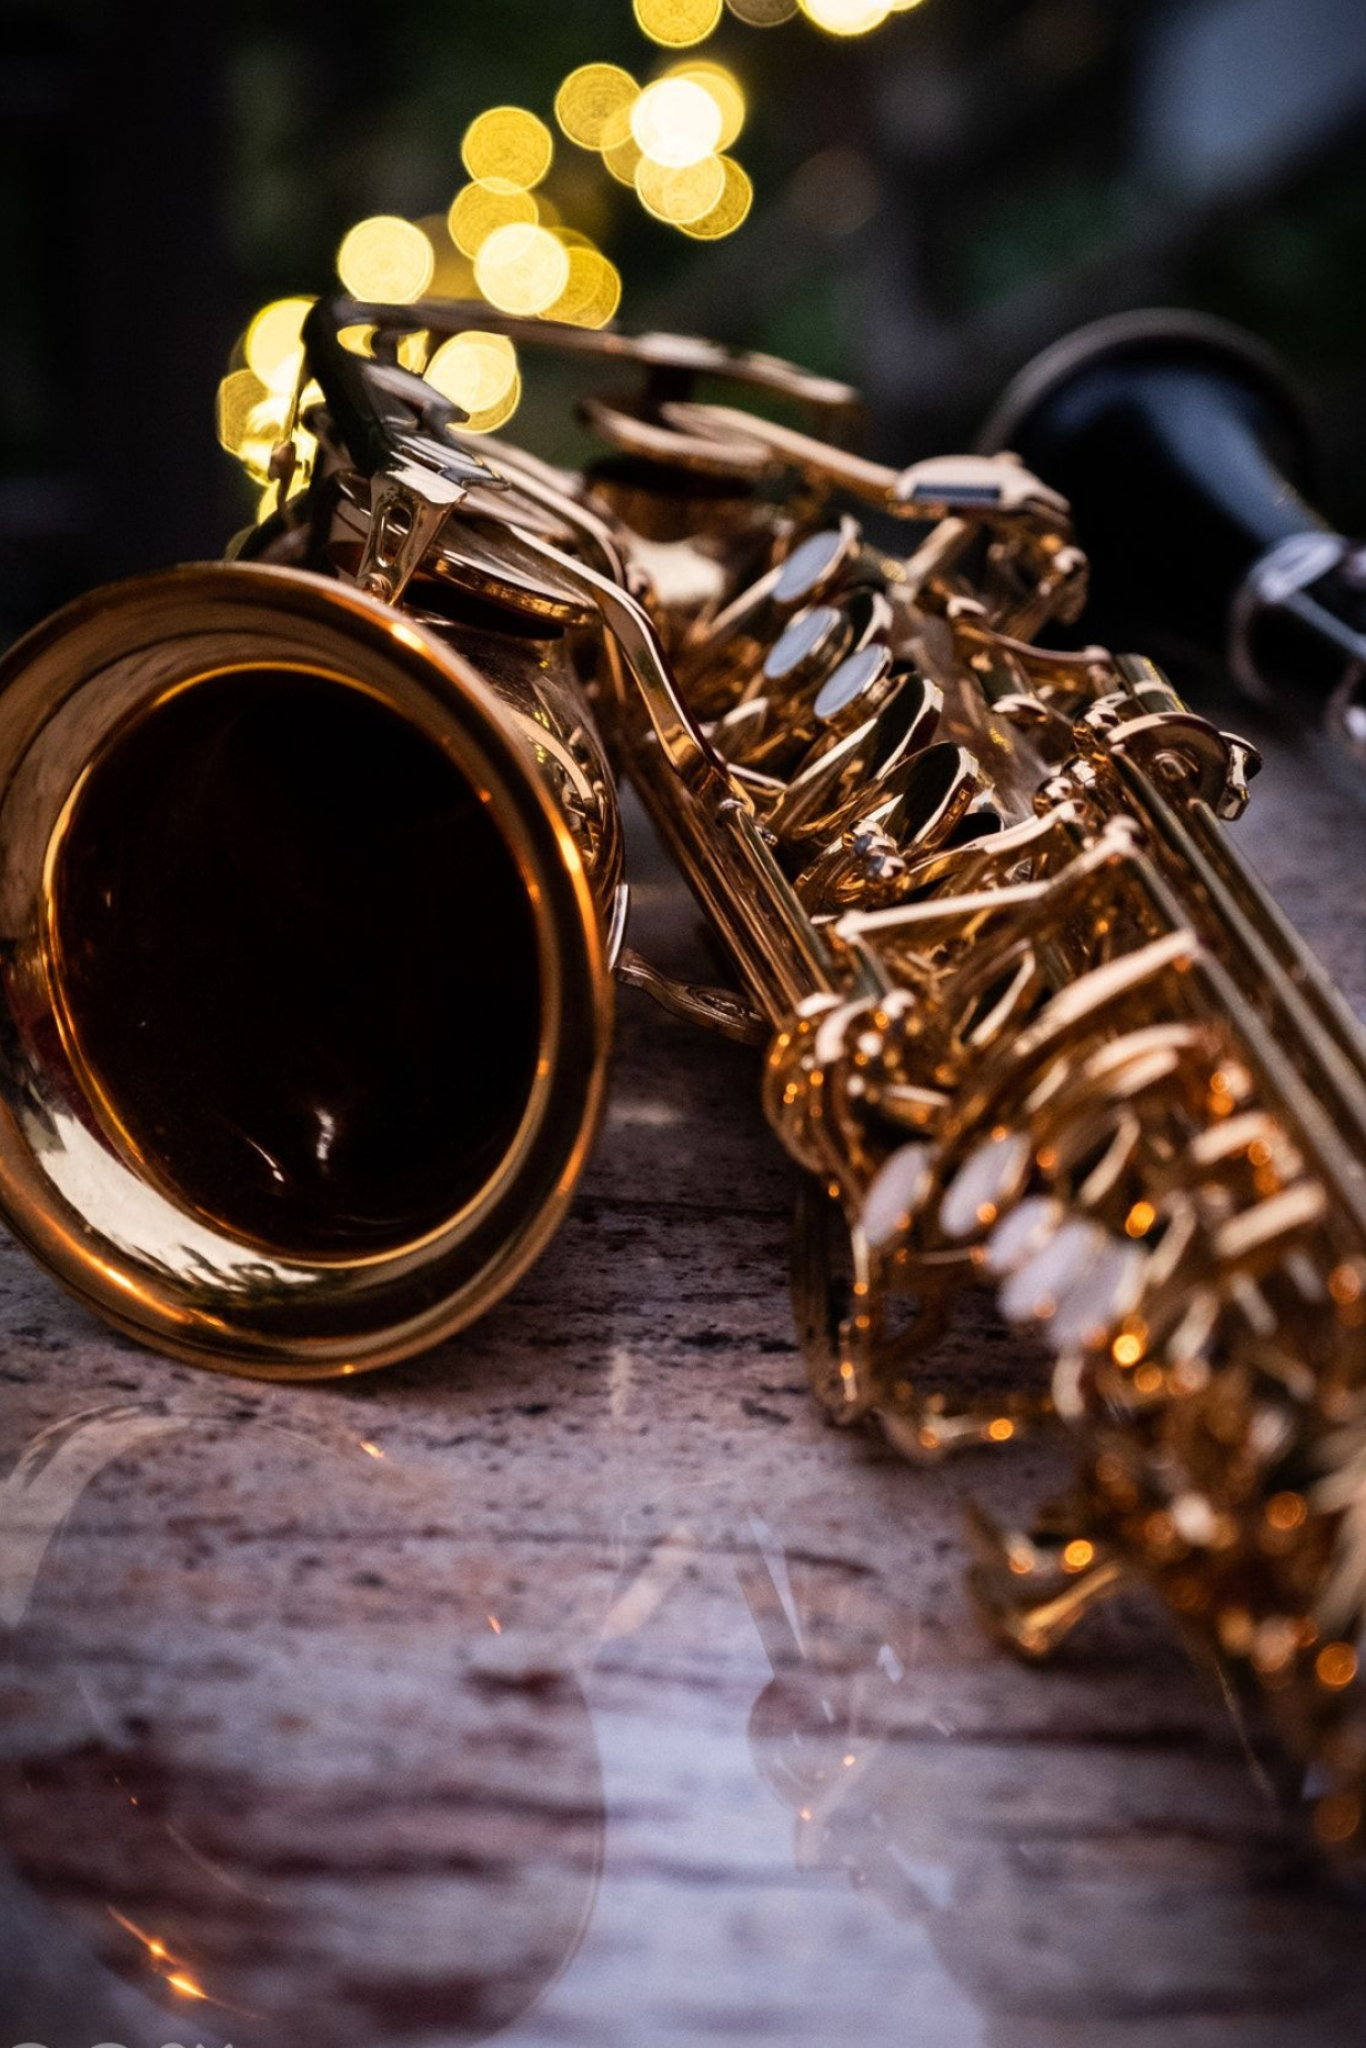 Saxophone: A musical wind instrument consisting of a brass tube and a mouthpiece with one reed. 1370x2050 HD Wallpaper.